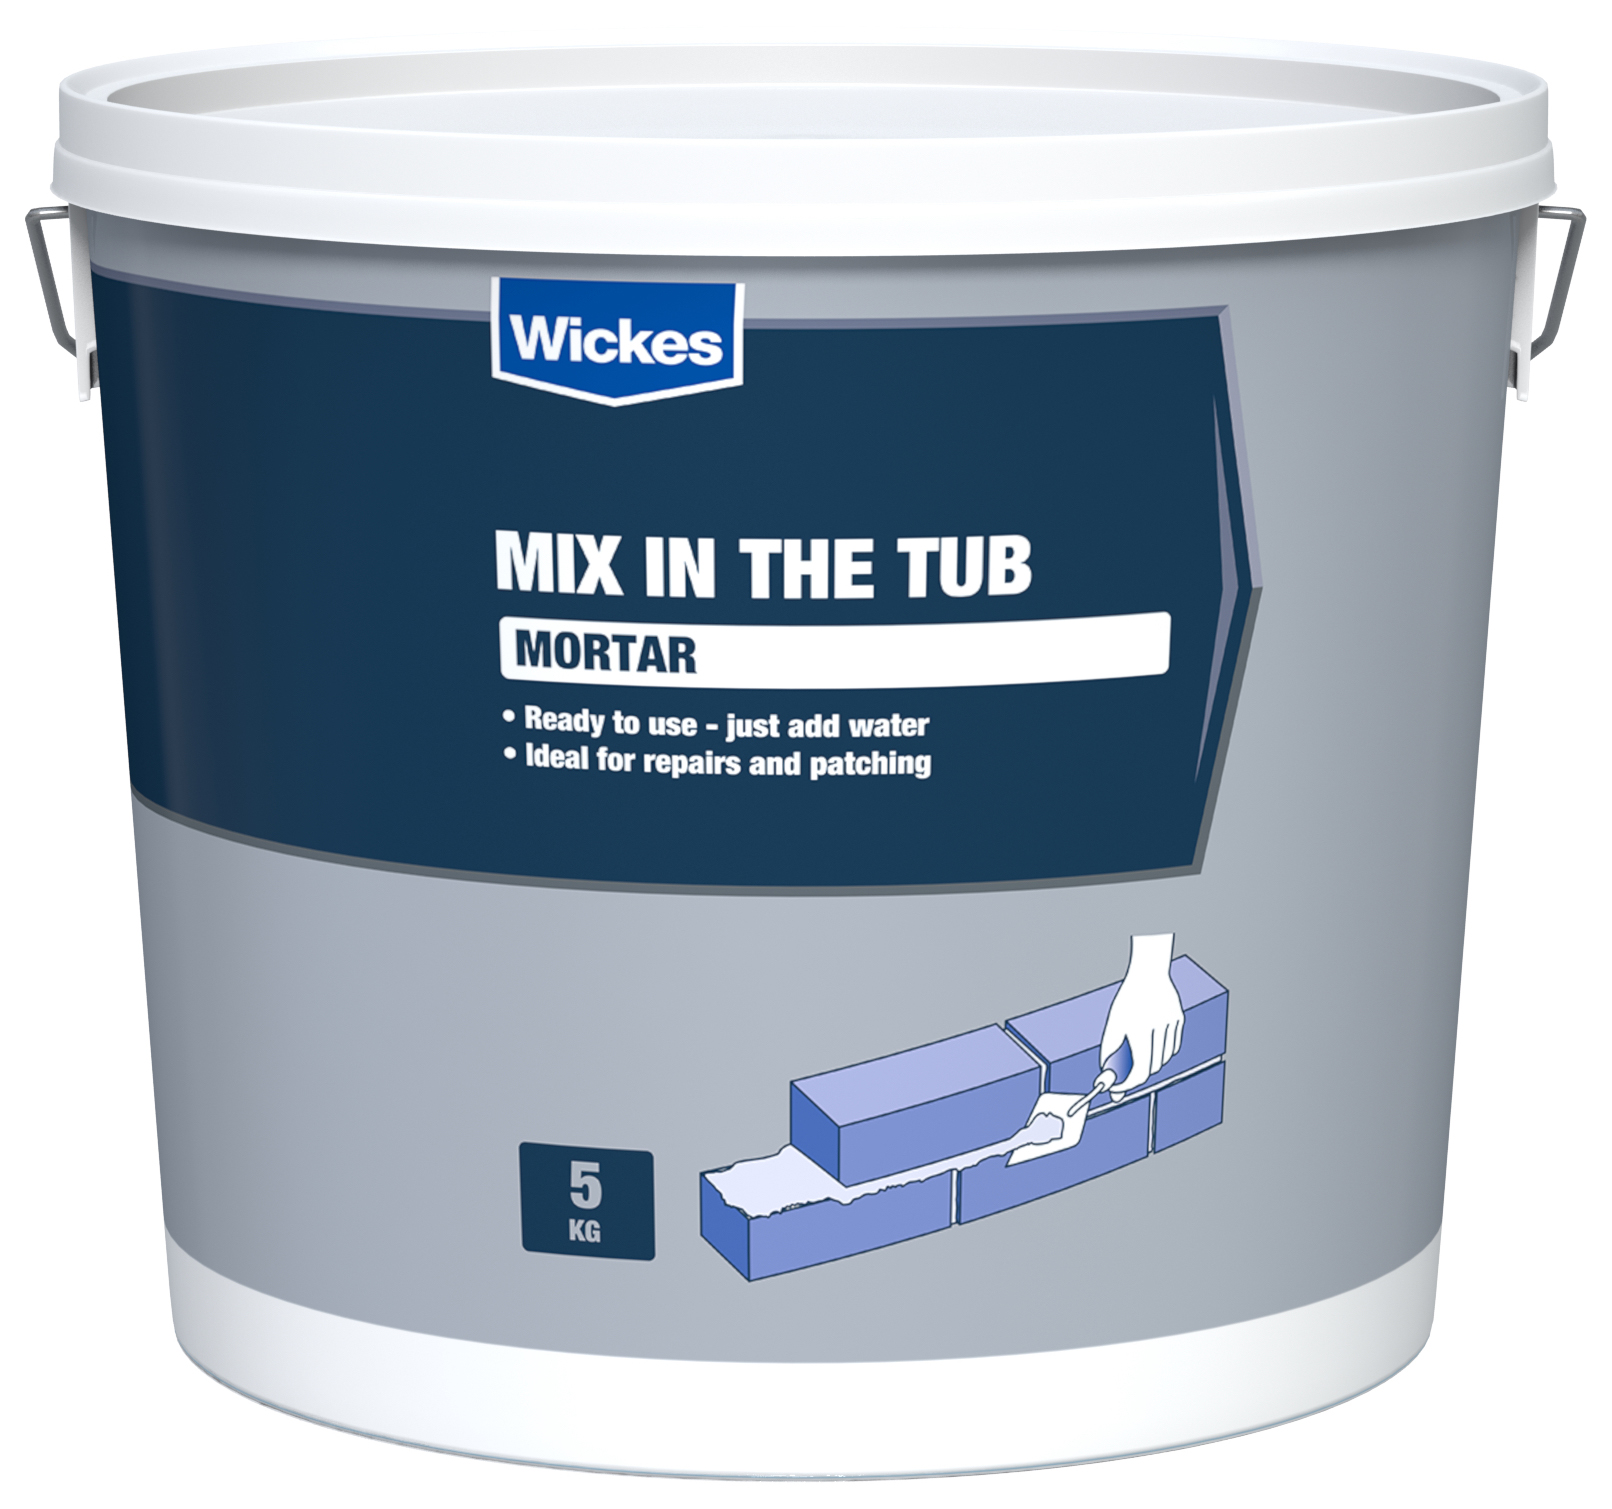 Wickes Mix in the Tub Mortar - 5kg